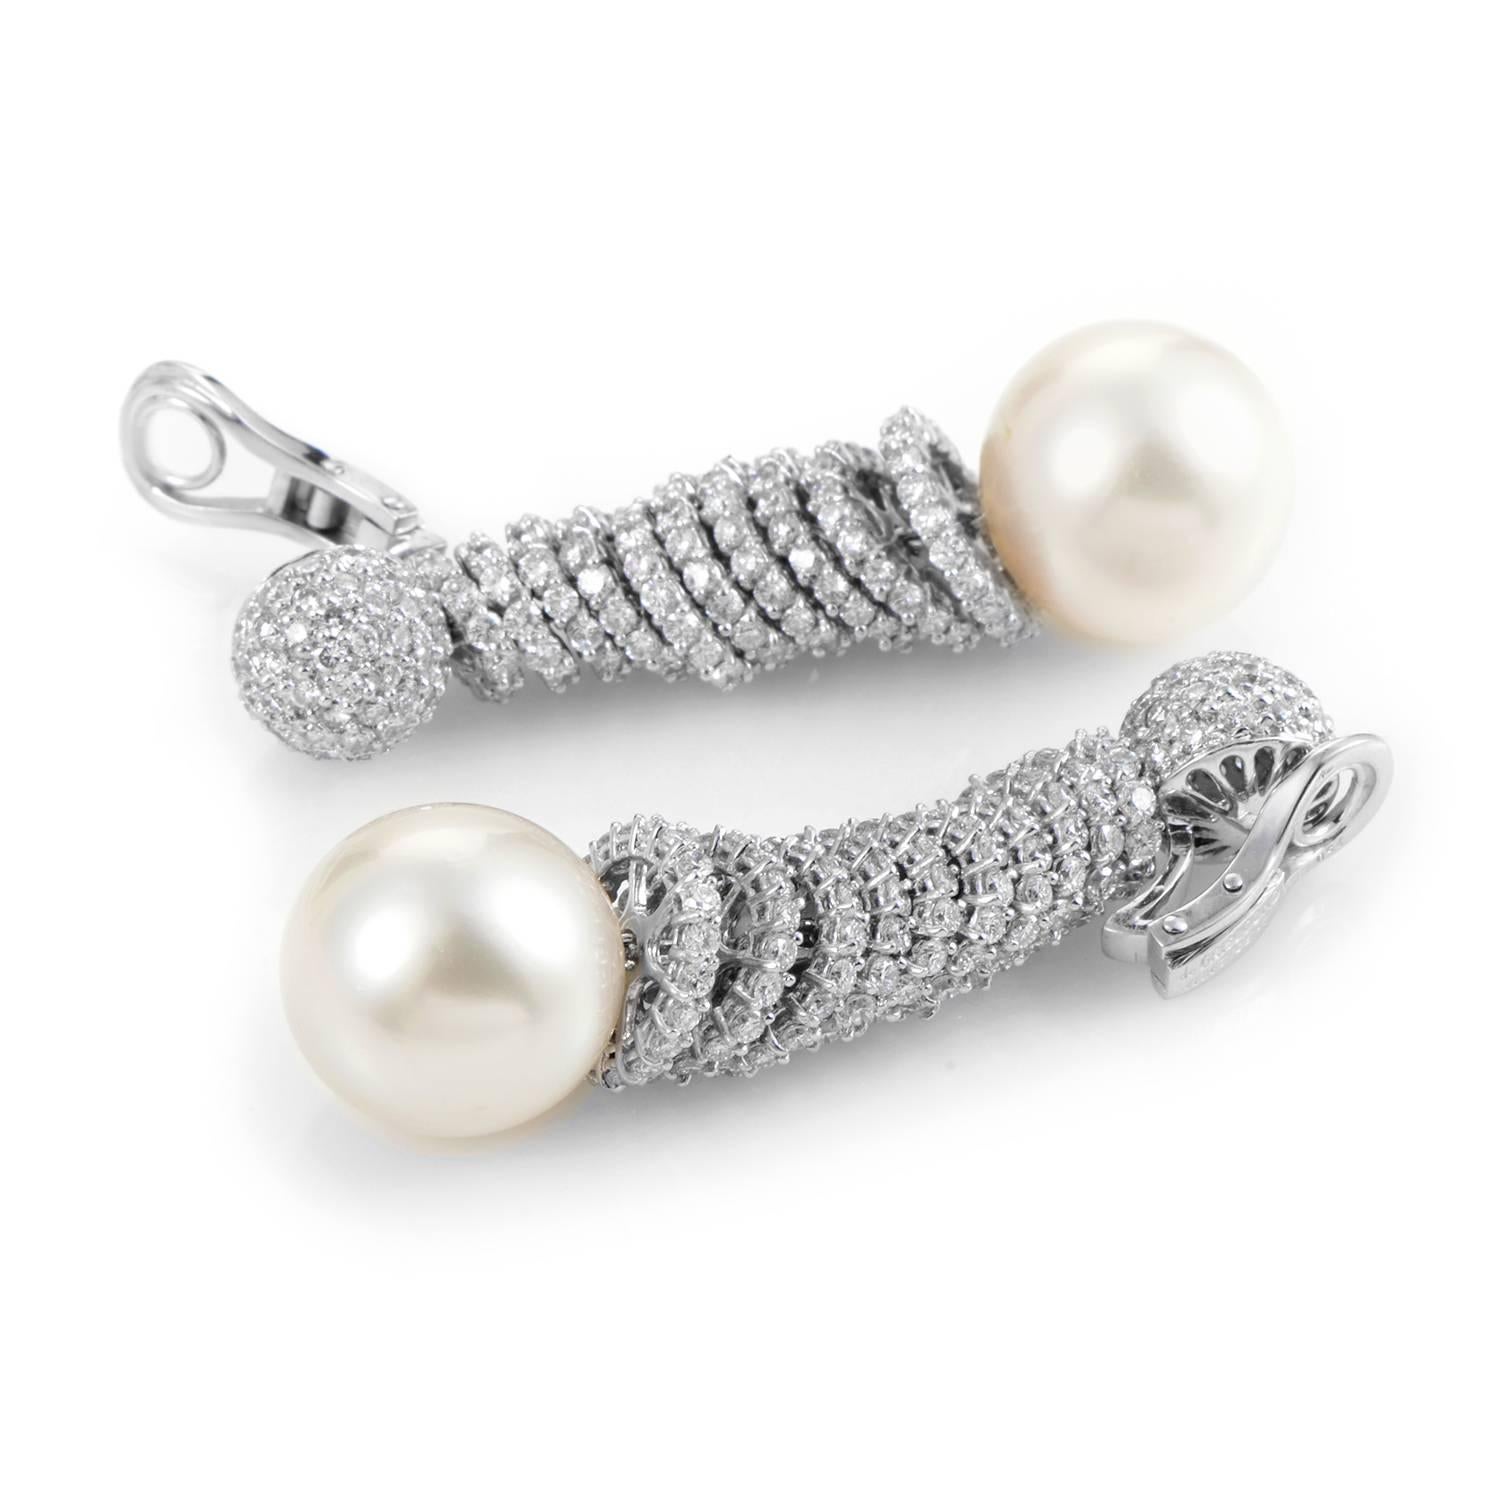 Perfectly complementing the scintillating blend of 18K white gold and glittering diamonds above, the pearls in this lavish pair of earrings from de Grisogono bring a delightful tone into the charming design, exuding delicate beauty through their